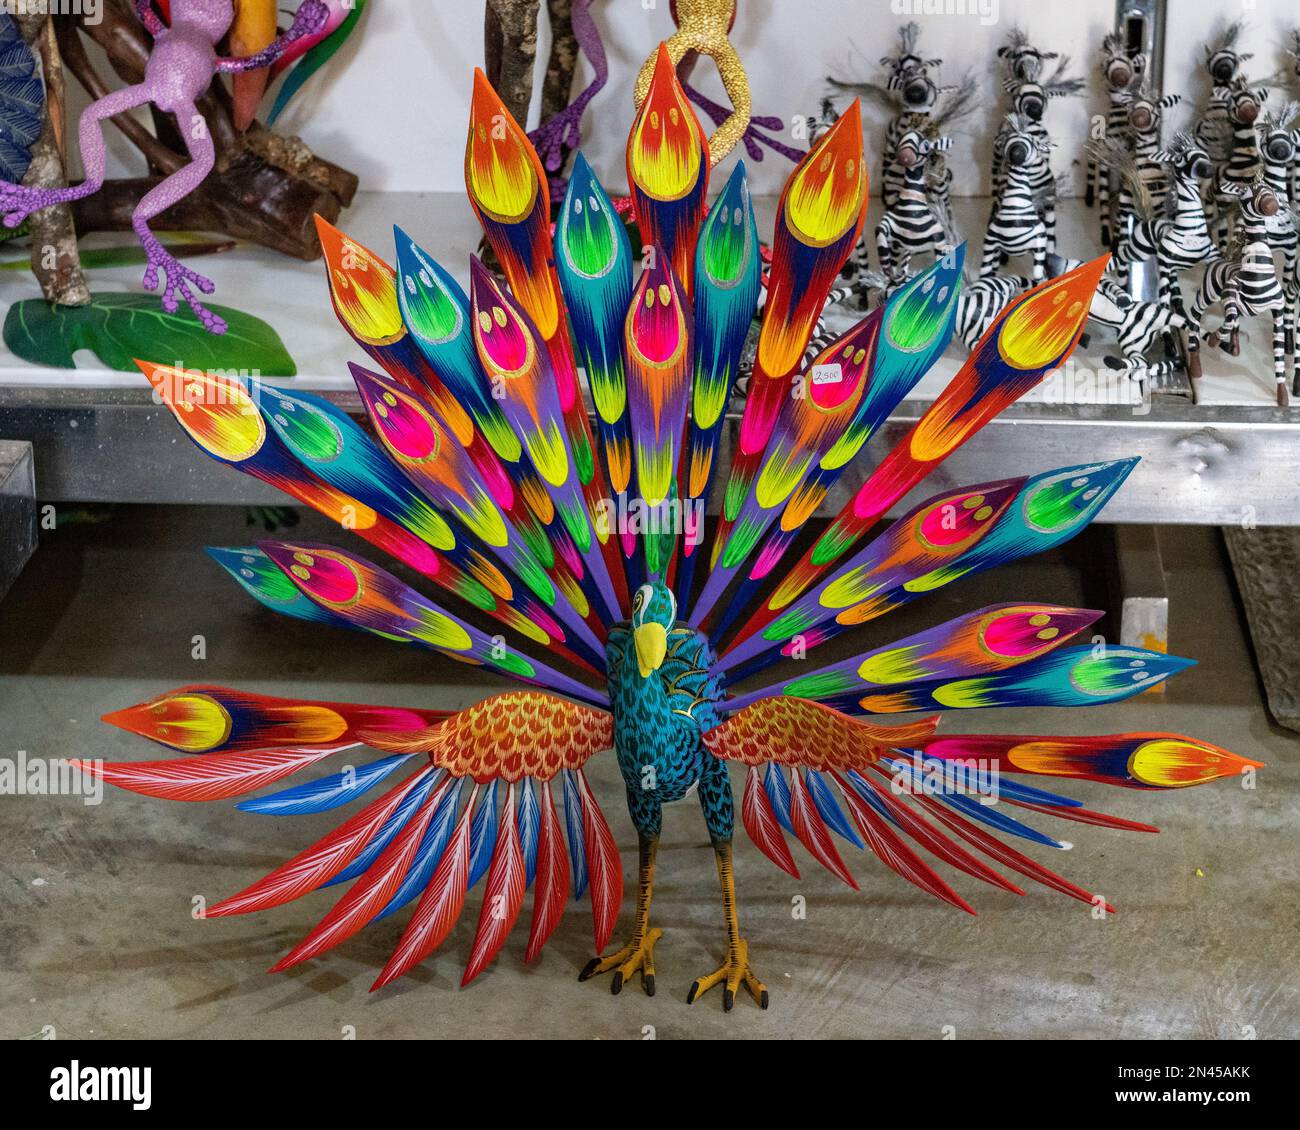 An alebrije peacock in an artisan's shop / workshop in San Antonio Arrazola, Oaxaca, Mexico.  Alebrijes are colorful painted creatures related to the Stock Photo